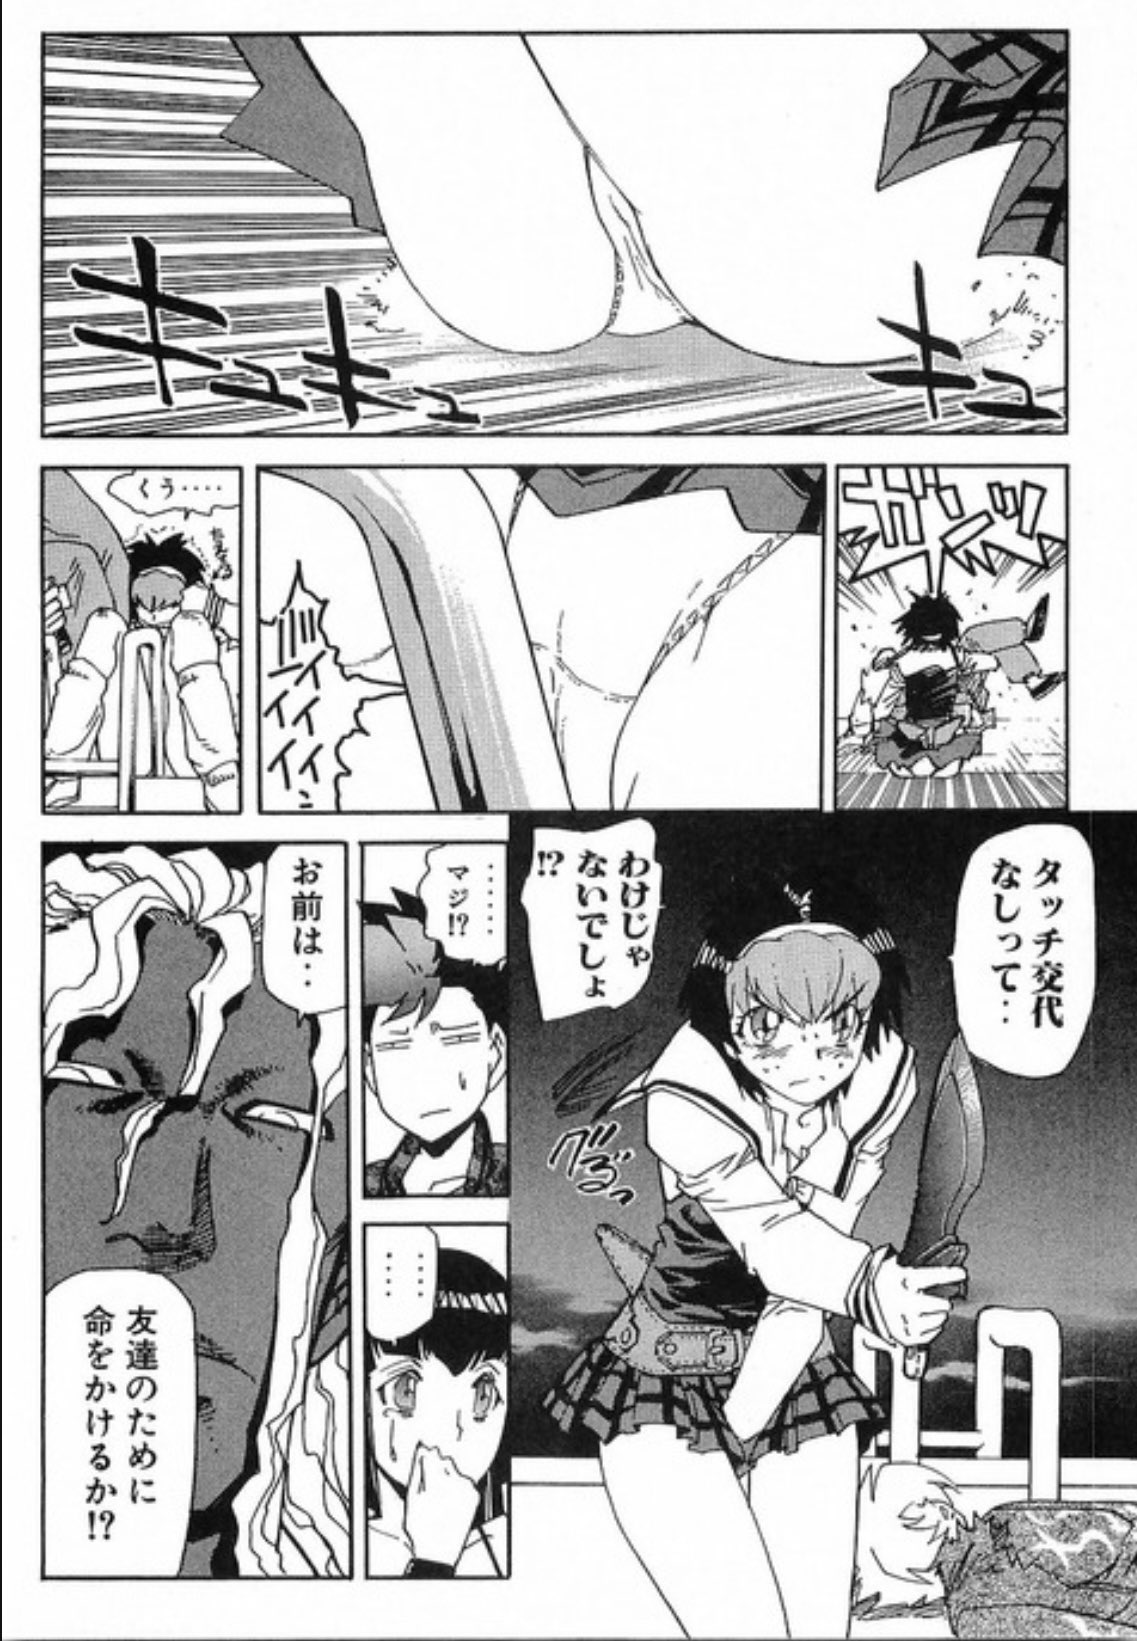 Deikun on X: On rW_Cuntbusters a ton of cuntbust art including manga and  Hentai unfound here. For example this one from a chapter in Hagane however  I can't find a place to